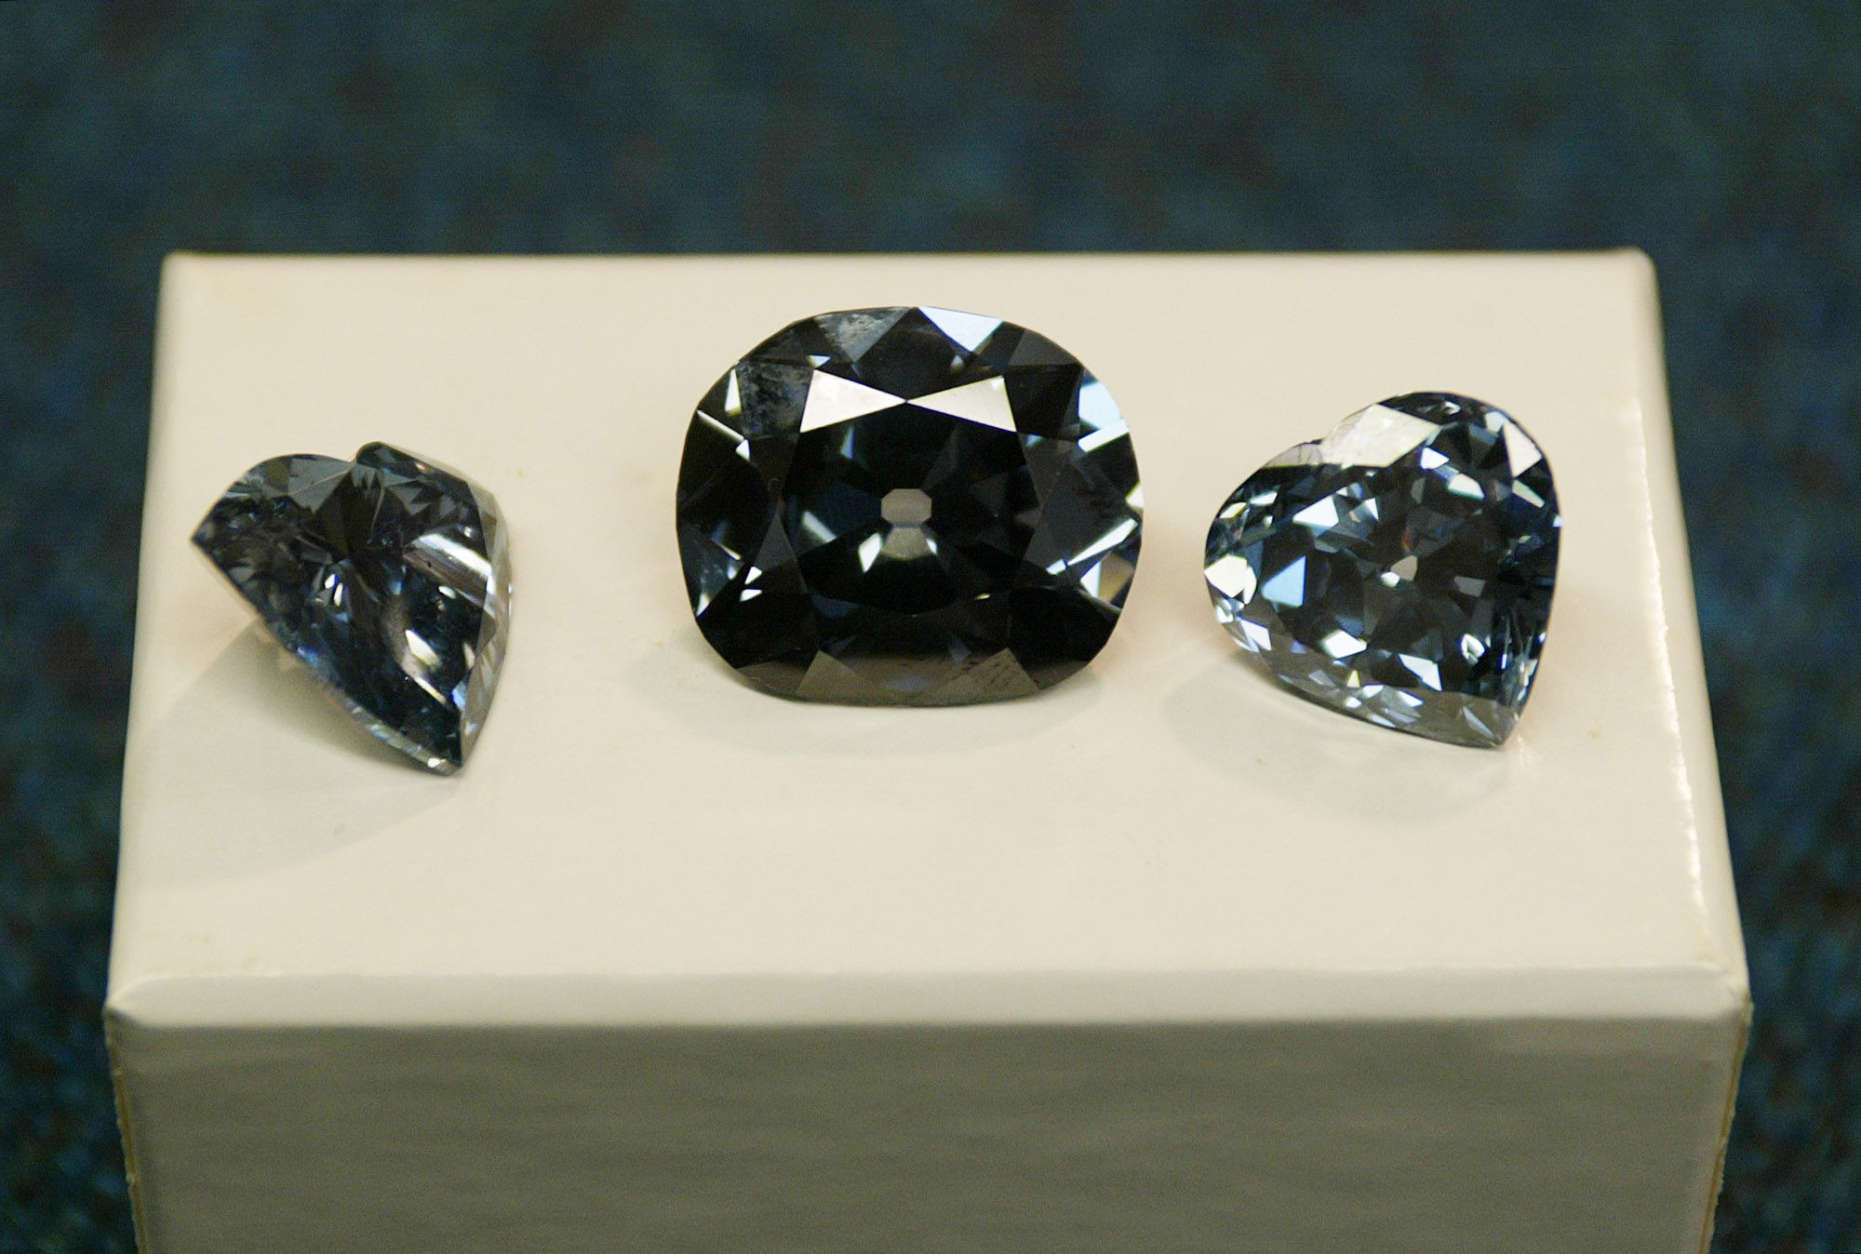 The Hope Diamond, center, flanked by the Heart of Eternity diamond, left, the Blue Heart diamond, is displayed at the Smithsonian's Natural History Museum in Washington Thursday, Oct. 2, 2003. On Thursday, the Hope Diamond, the world's most famous blue diamond, was removed from its high-security case for testing of its light refracting qualities and to try to determine what impurities give it its blue colors. (AP Photo/Ron Edmonds)